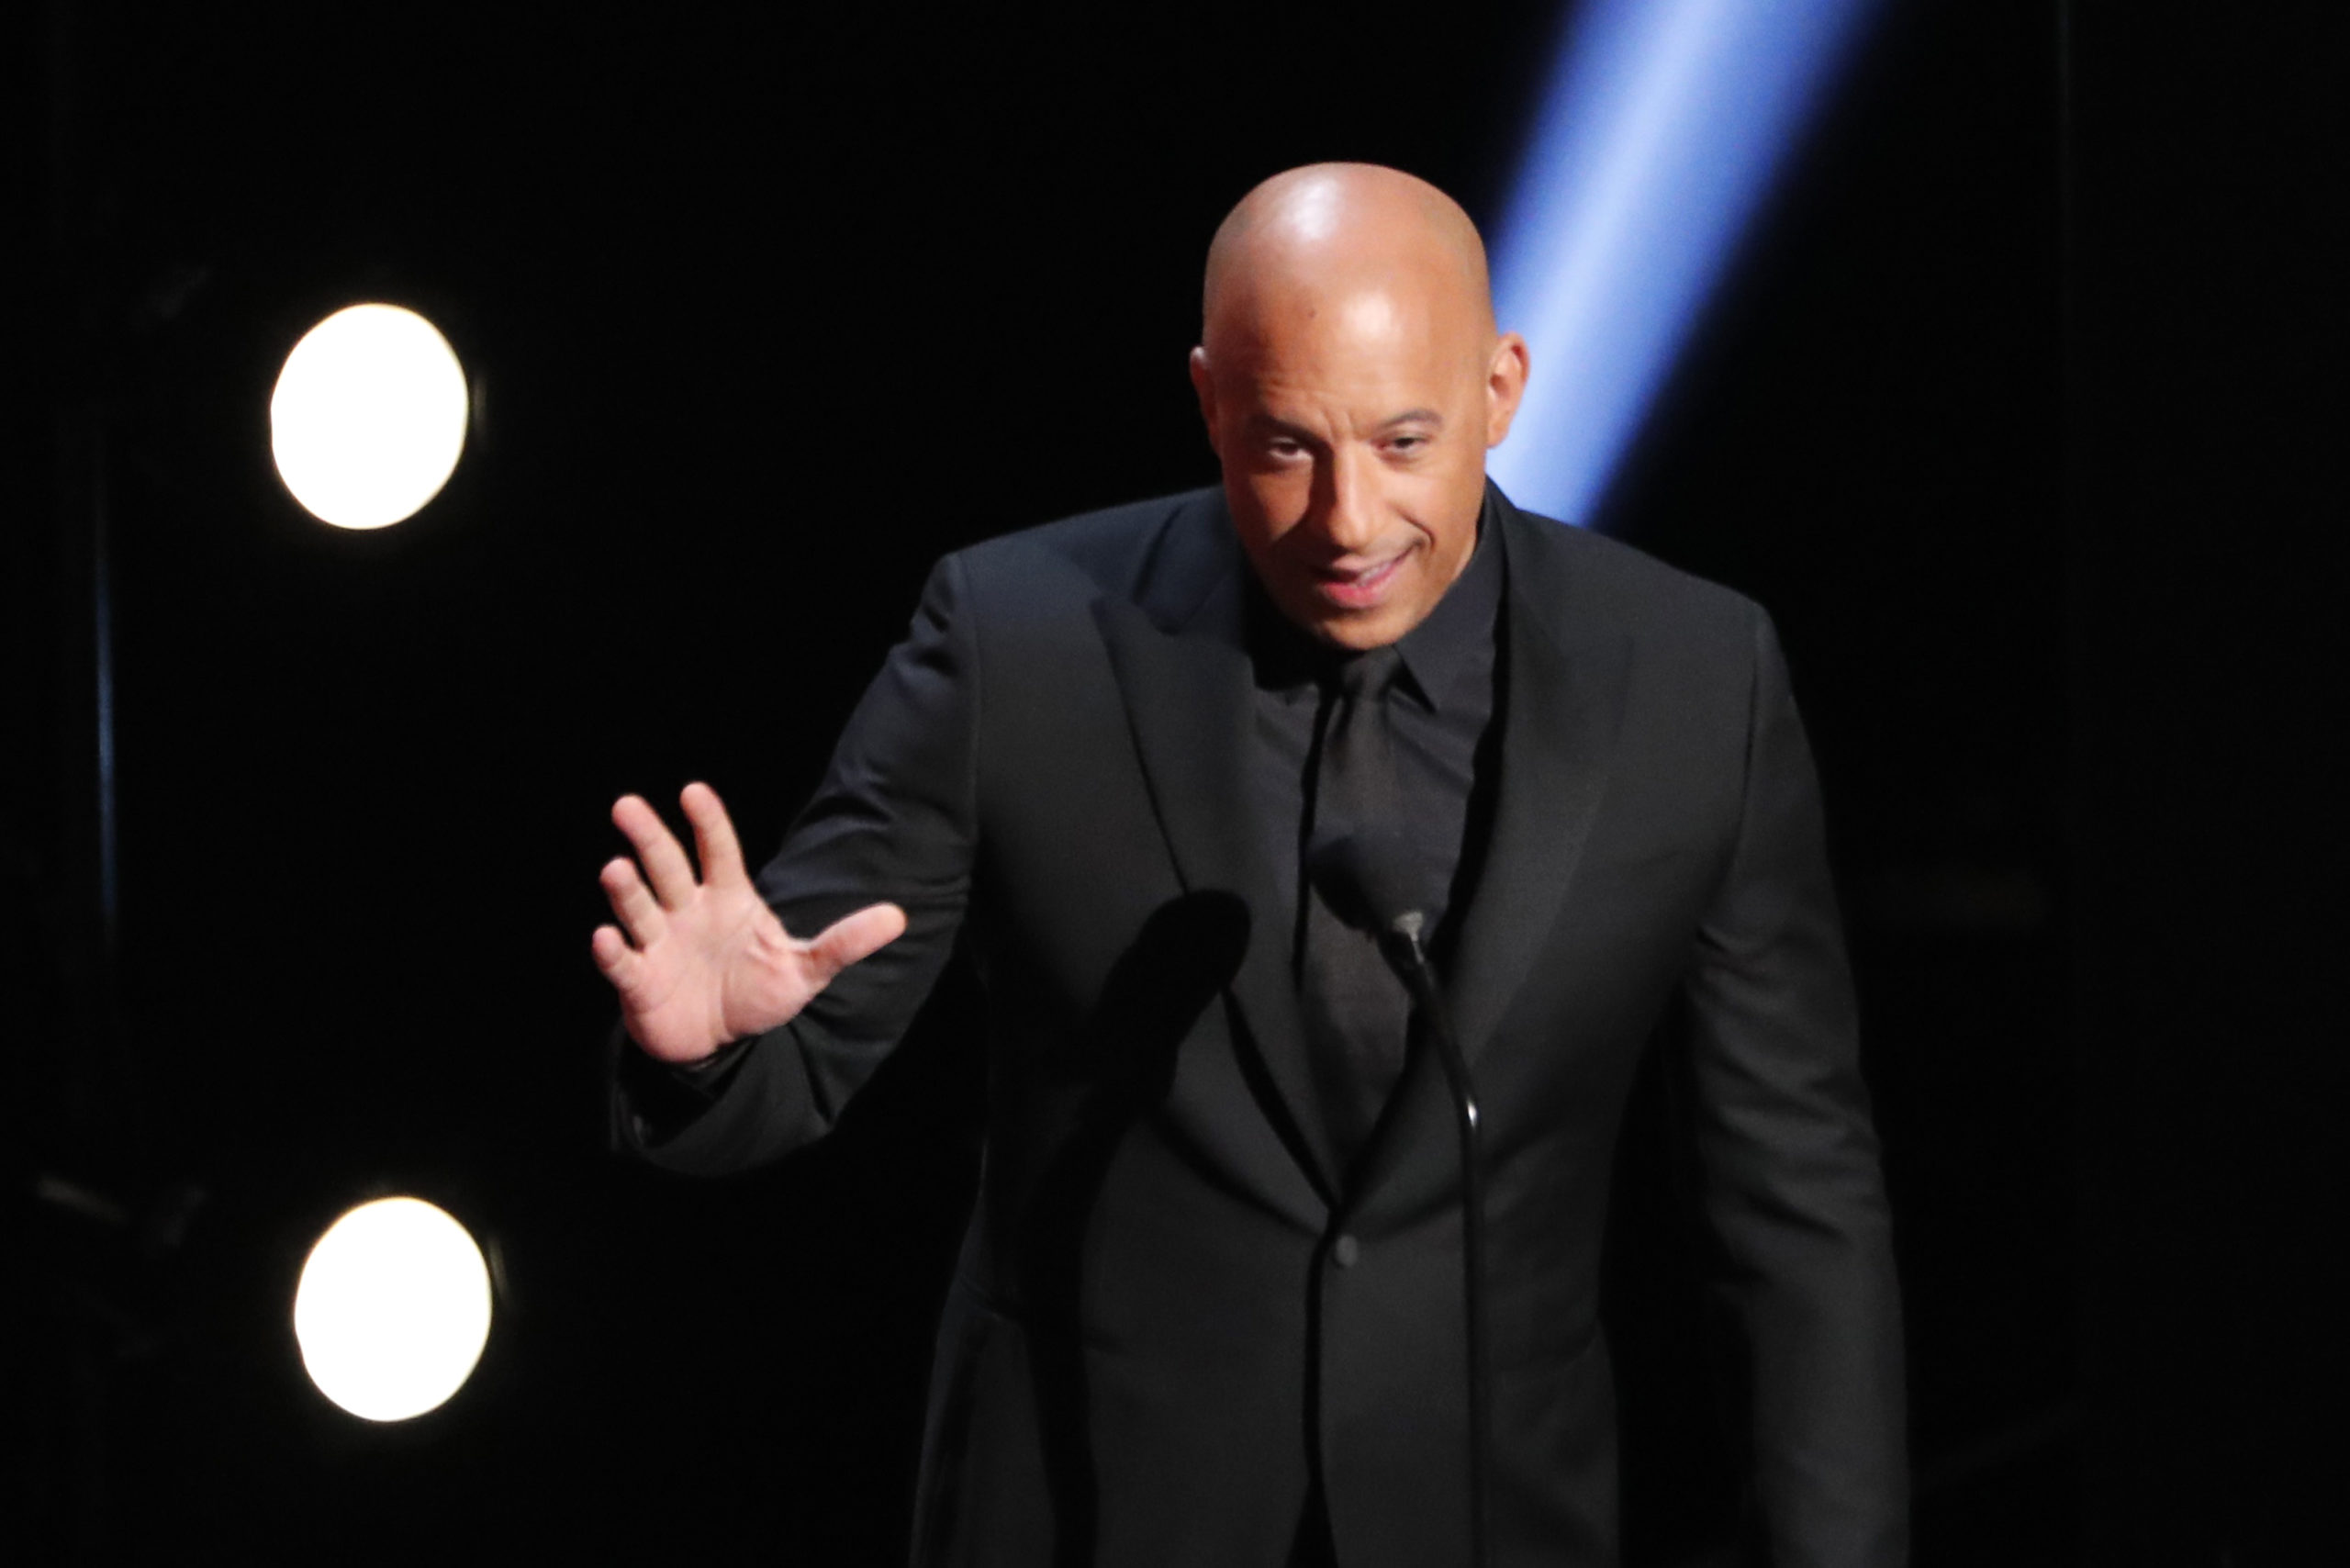 50th NAACP Image Awards - Show - Los Angeles, California, U.S., March 30, 2019 - Vin Diesel presents the best motion picture award. REUTERS/Mario Anzuoni